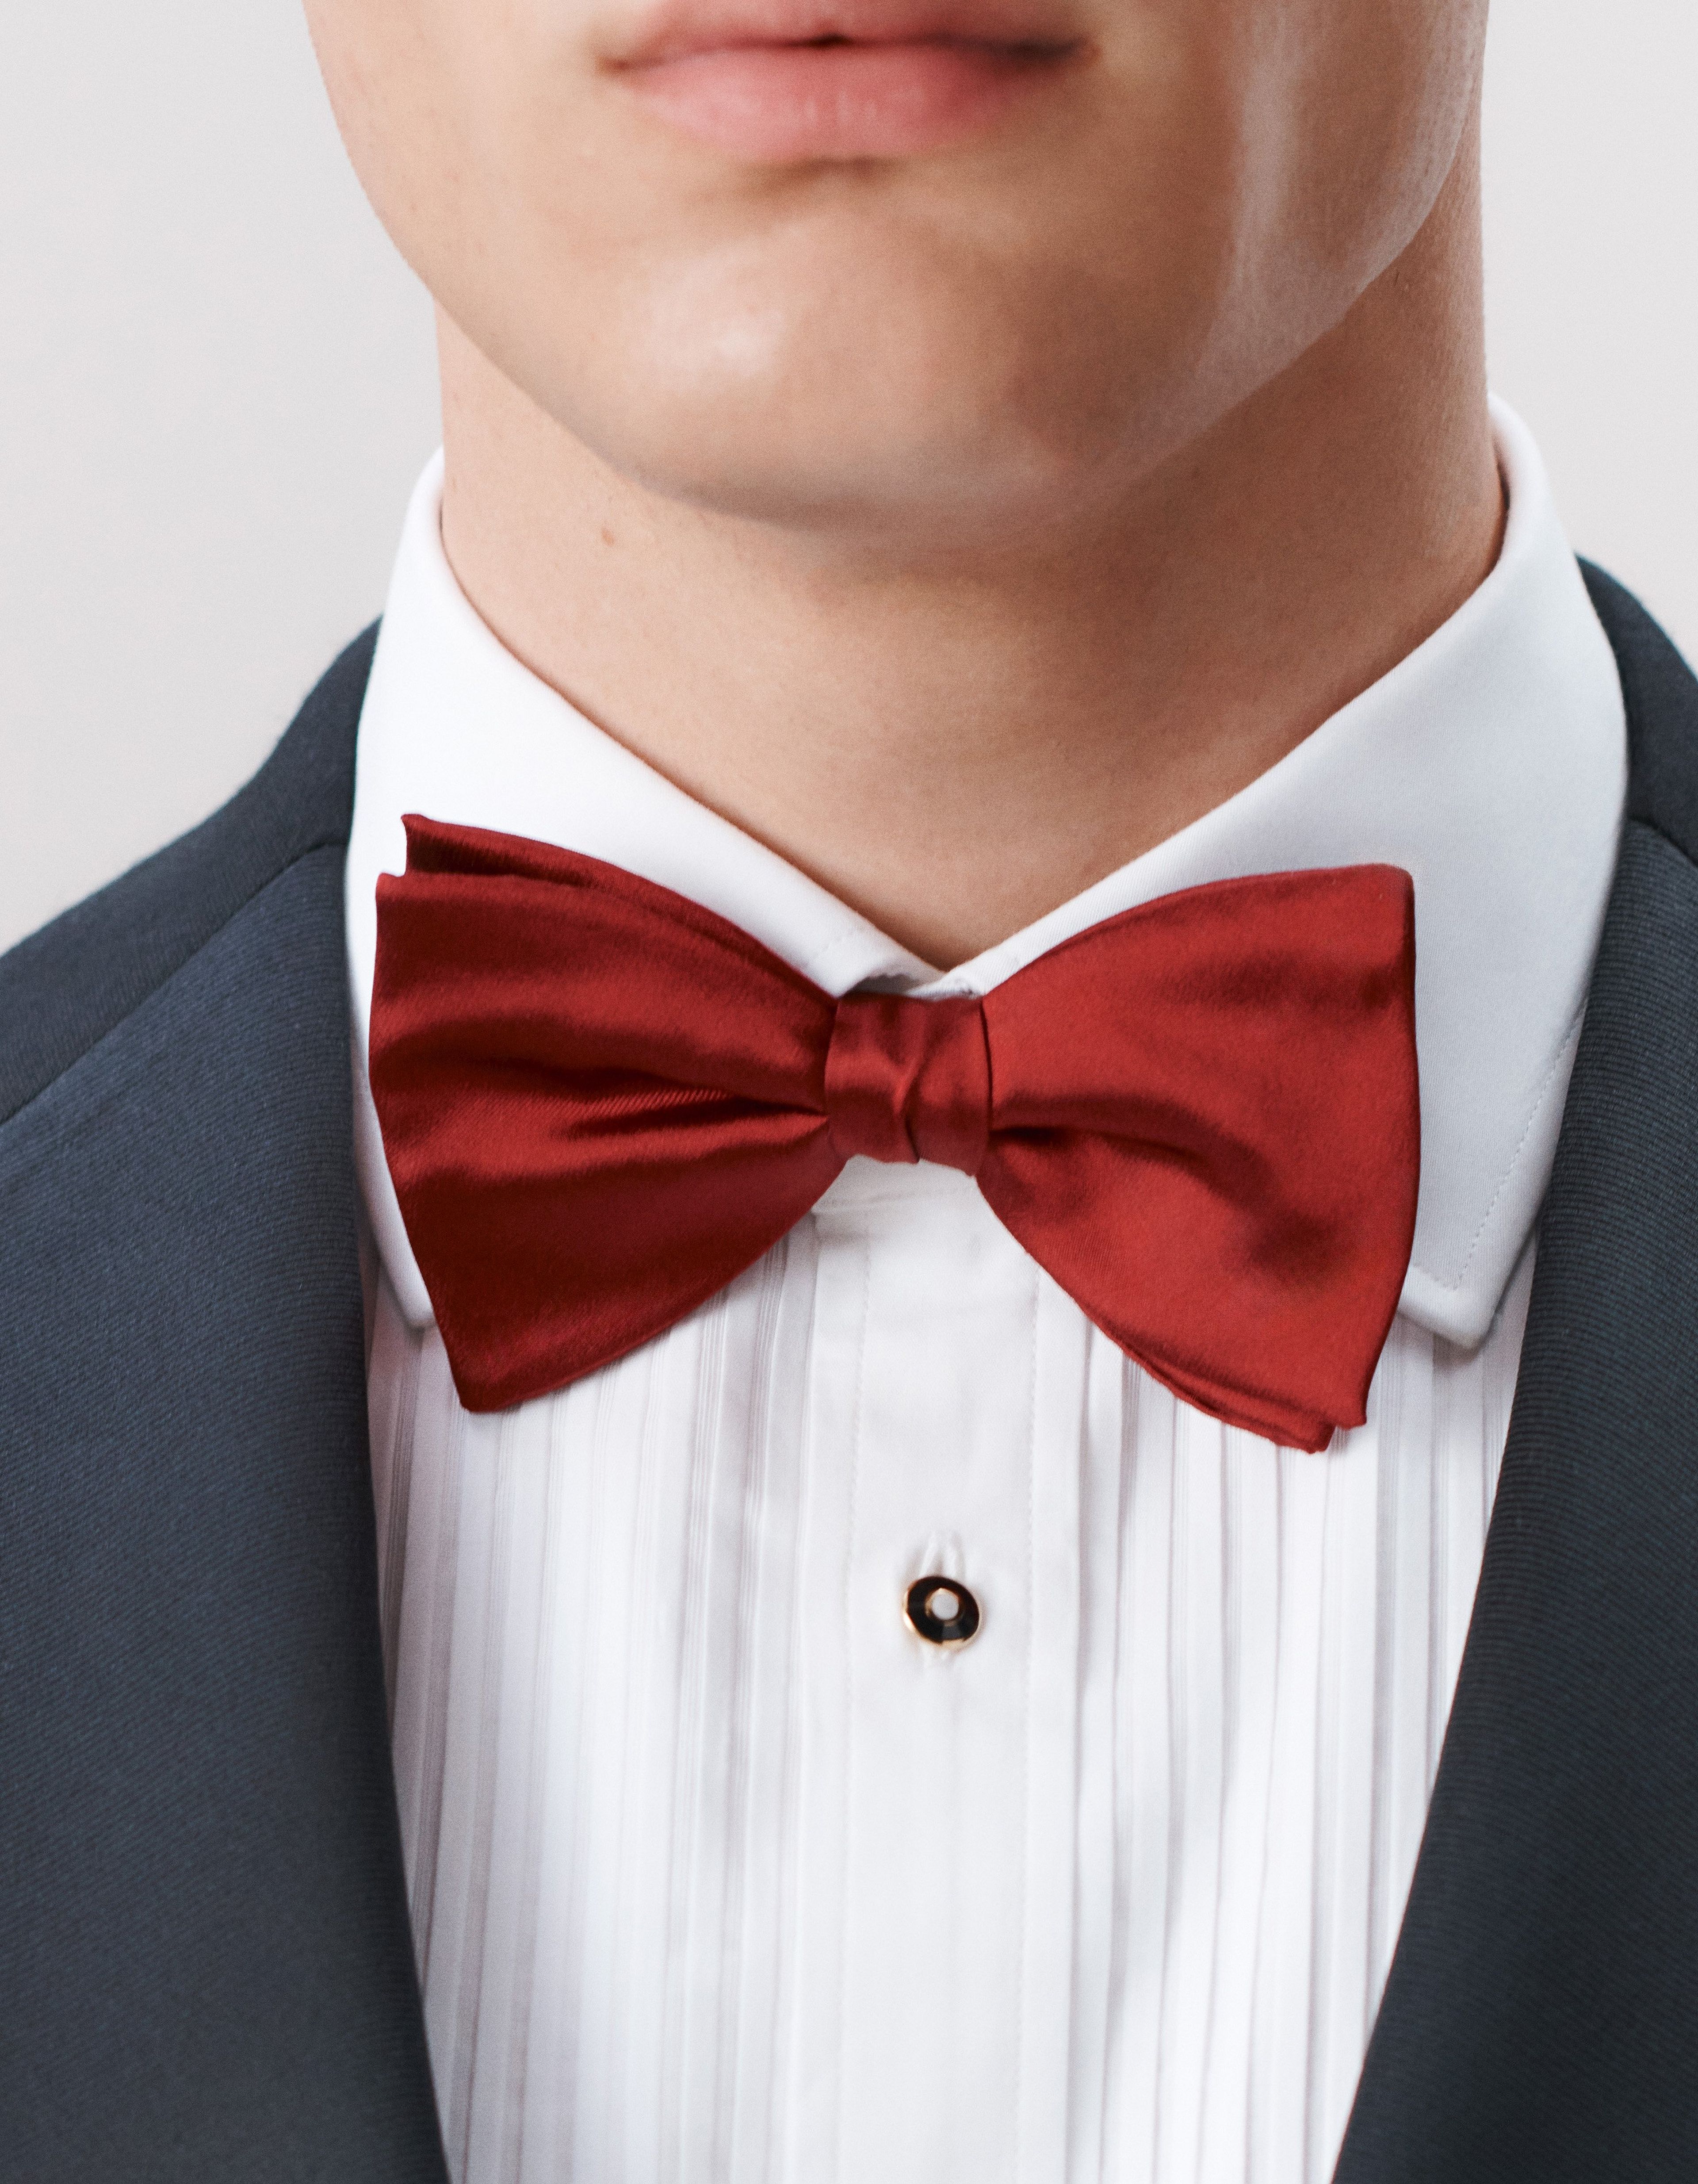 A close up of a man wearing a black evening jacket, white evening shirt with a red bow tie